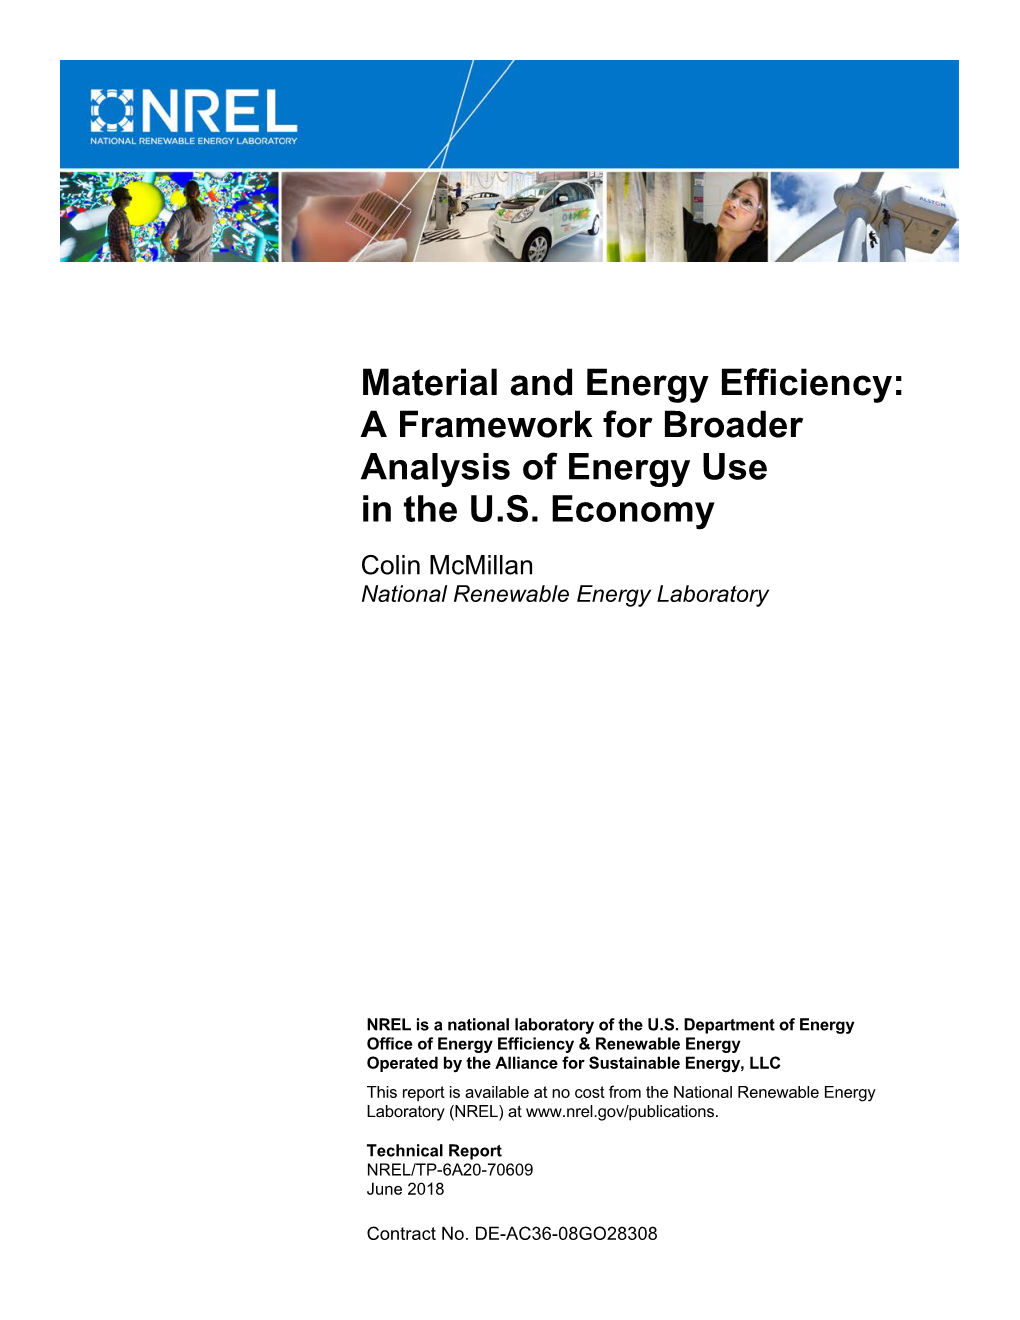 A Framework for Broader Analysis of Energy Use in the US Economy